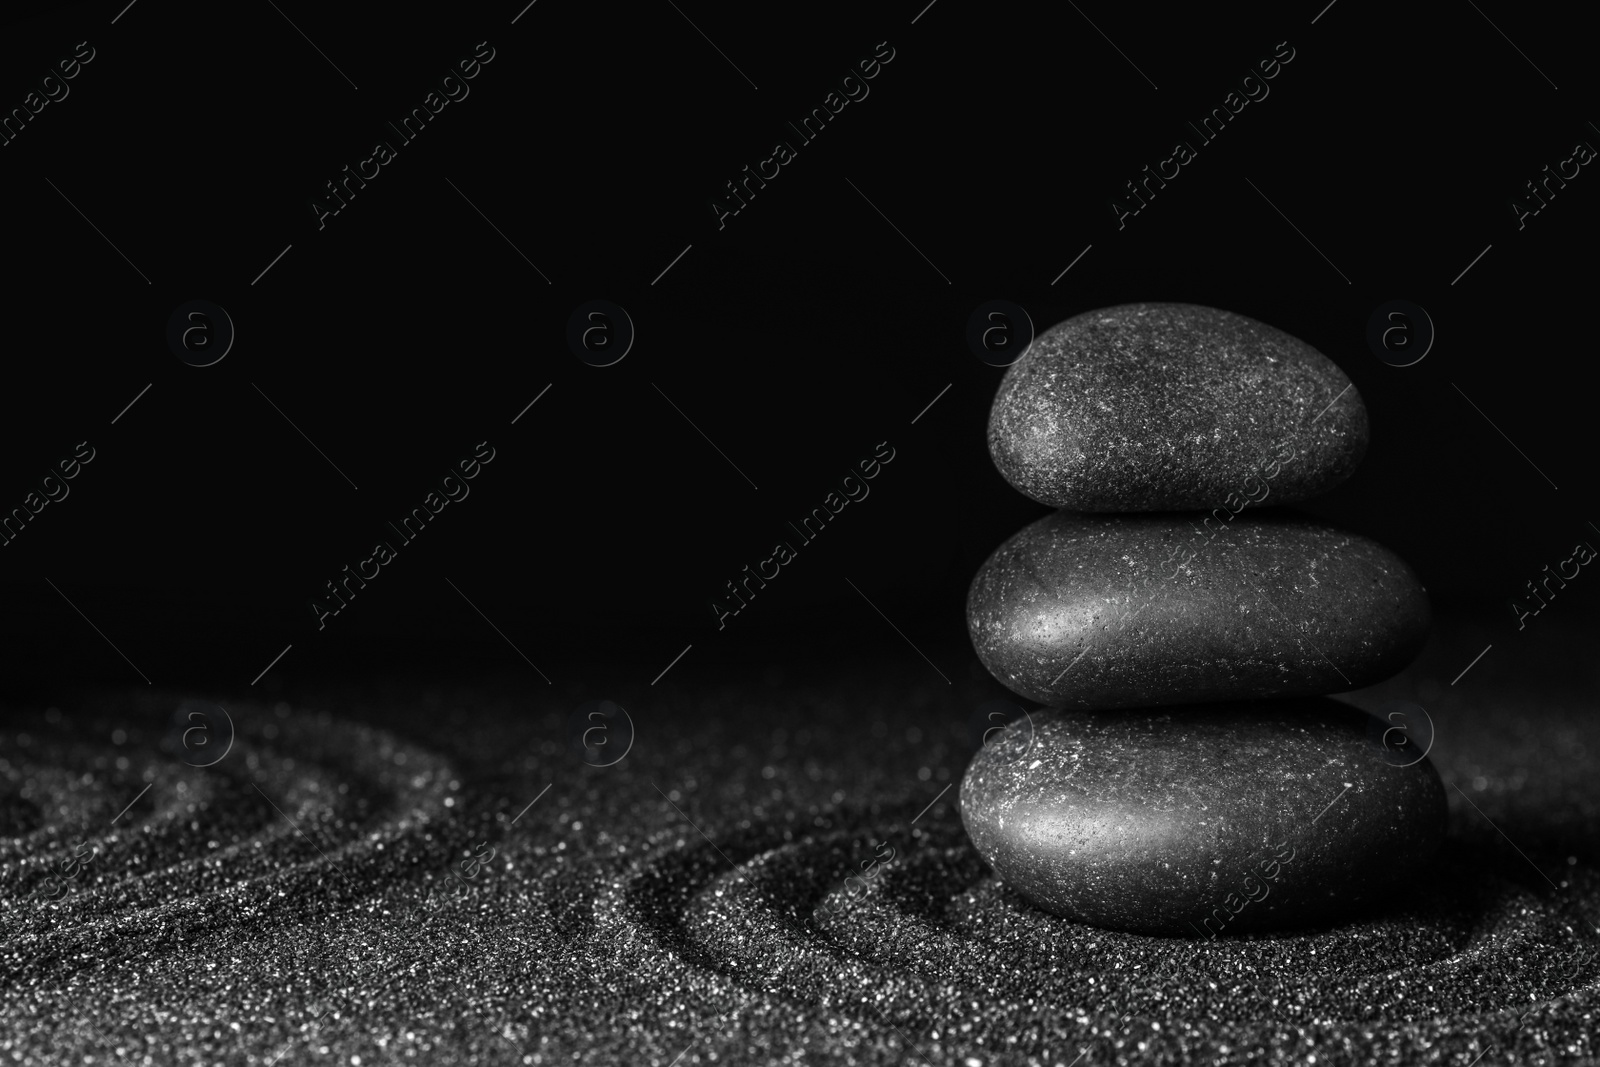 Photo of Black sand with stones and beautiful pattern against dark background. Zen concept